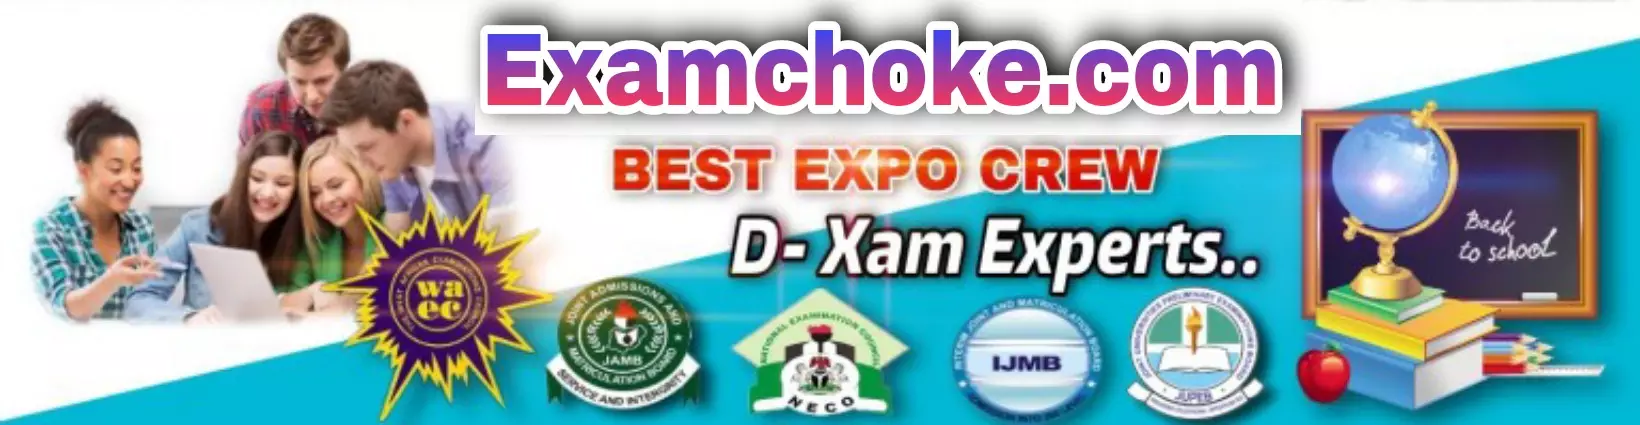 WELCOME TO EXAMCHOKE.COM  THE HOME OF EXCELLENT RESULTS TEAM